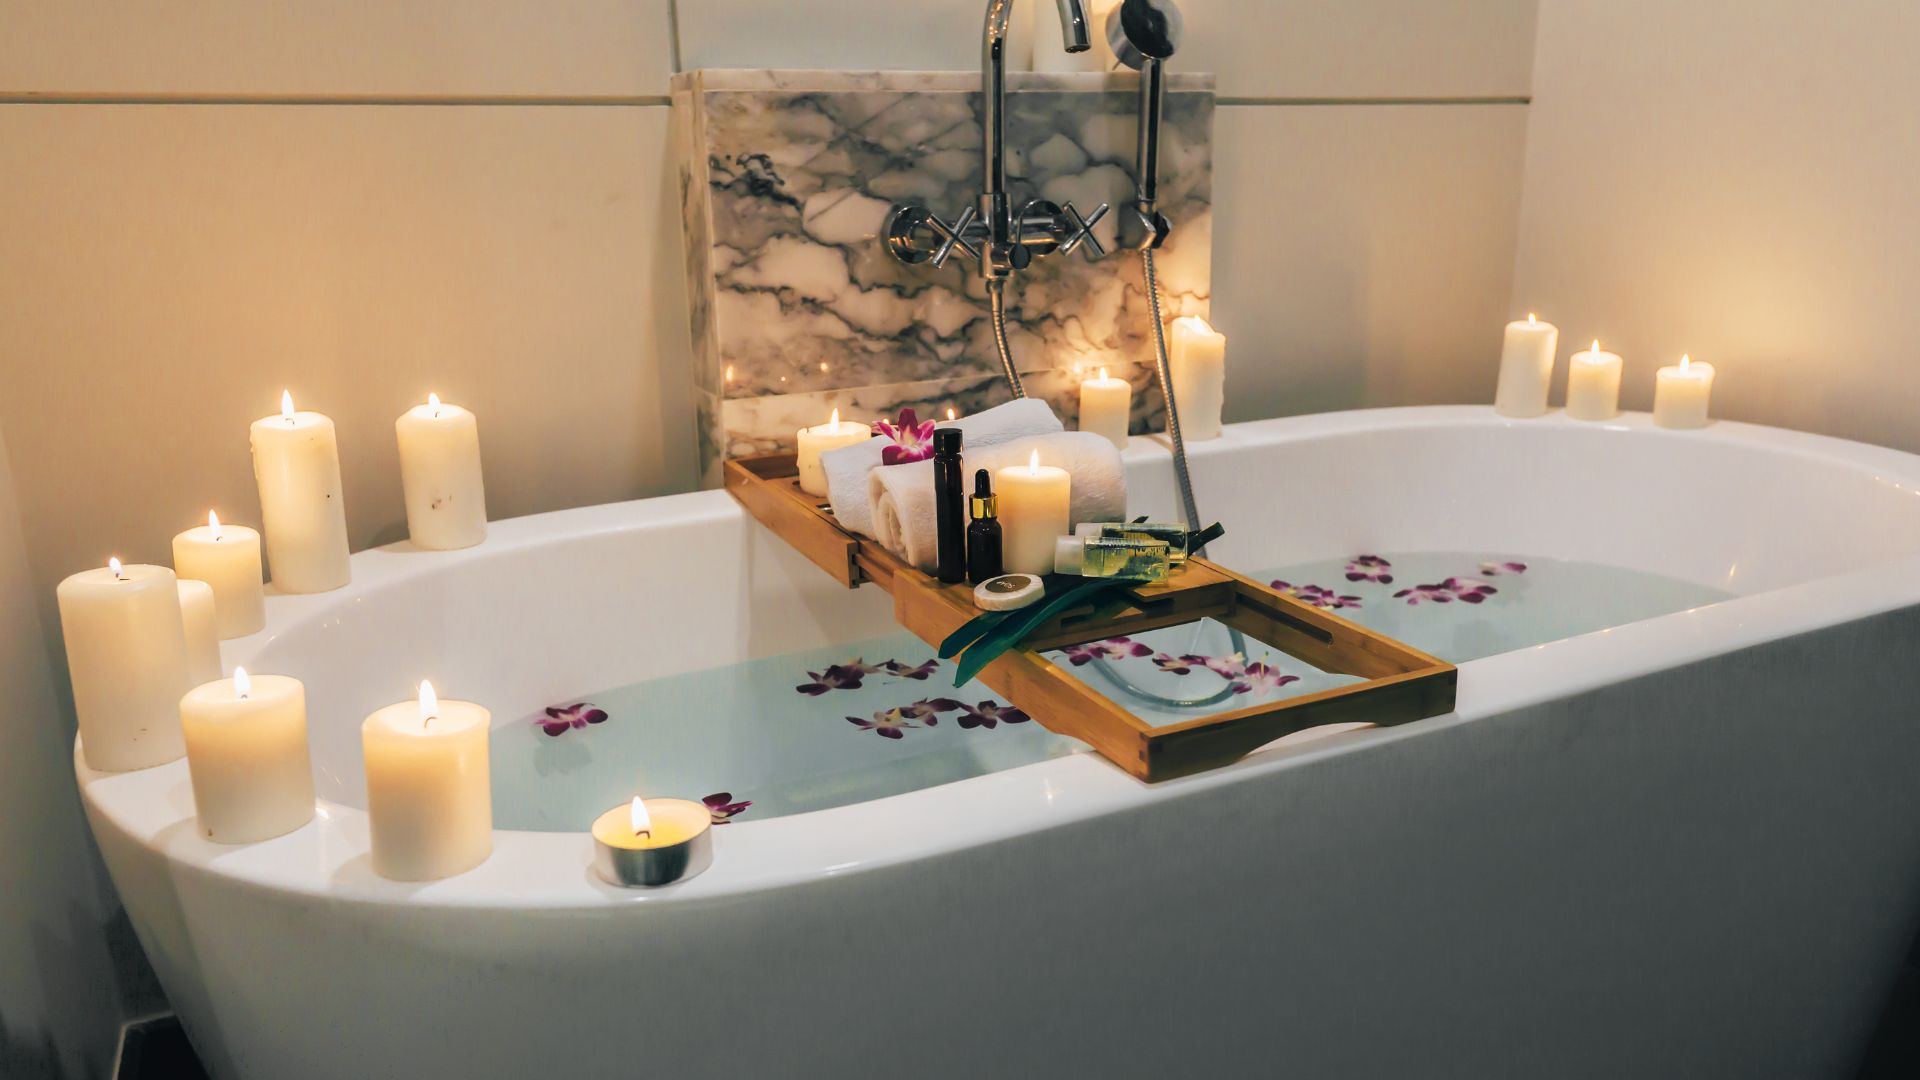 Bathroom accessories with a spa-inspired feel, perfect for plumbers